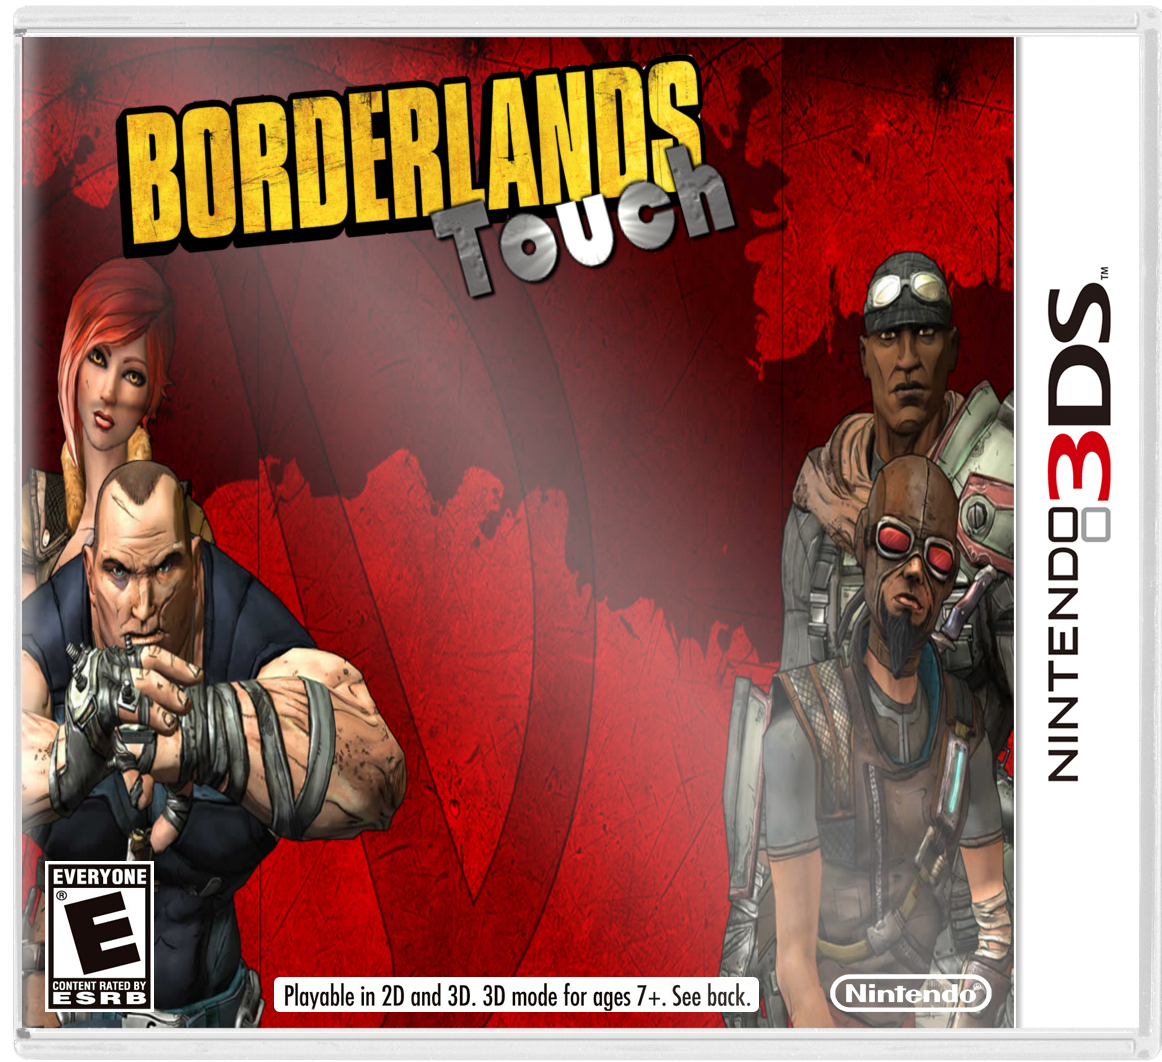 Borderlands Touch box cover